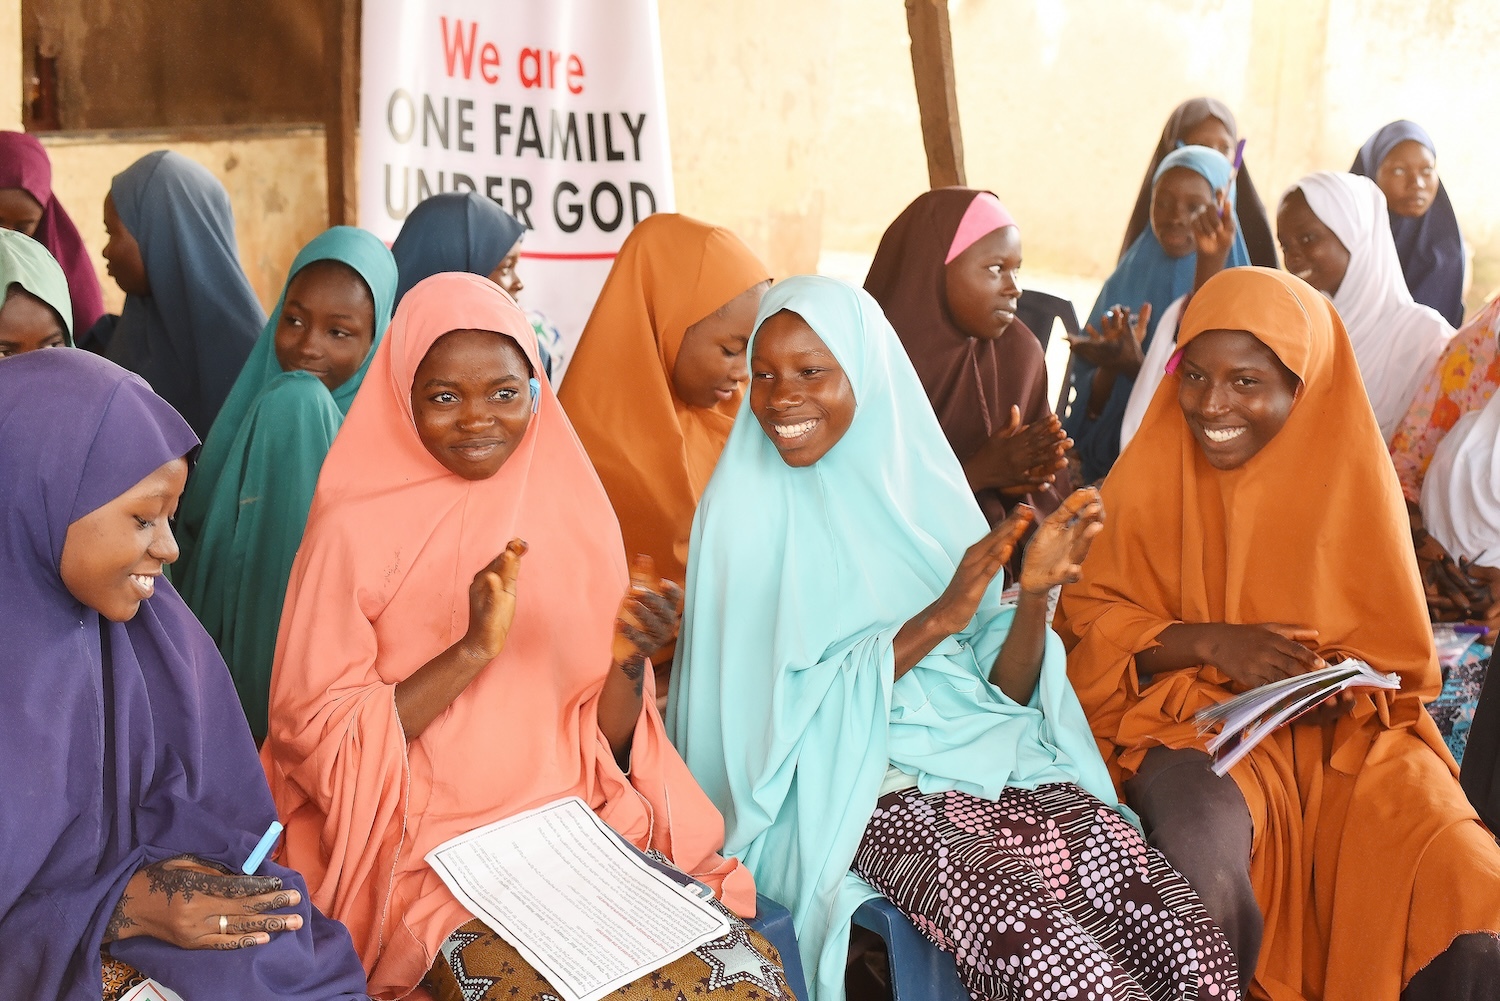 A group of women in colorful hijabs sits together, some clapping and smiling, with a banner in the background reading "We are ONE FAMILY UNDER GOD," celebrating Healthy Living and Peace.